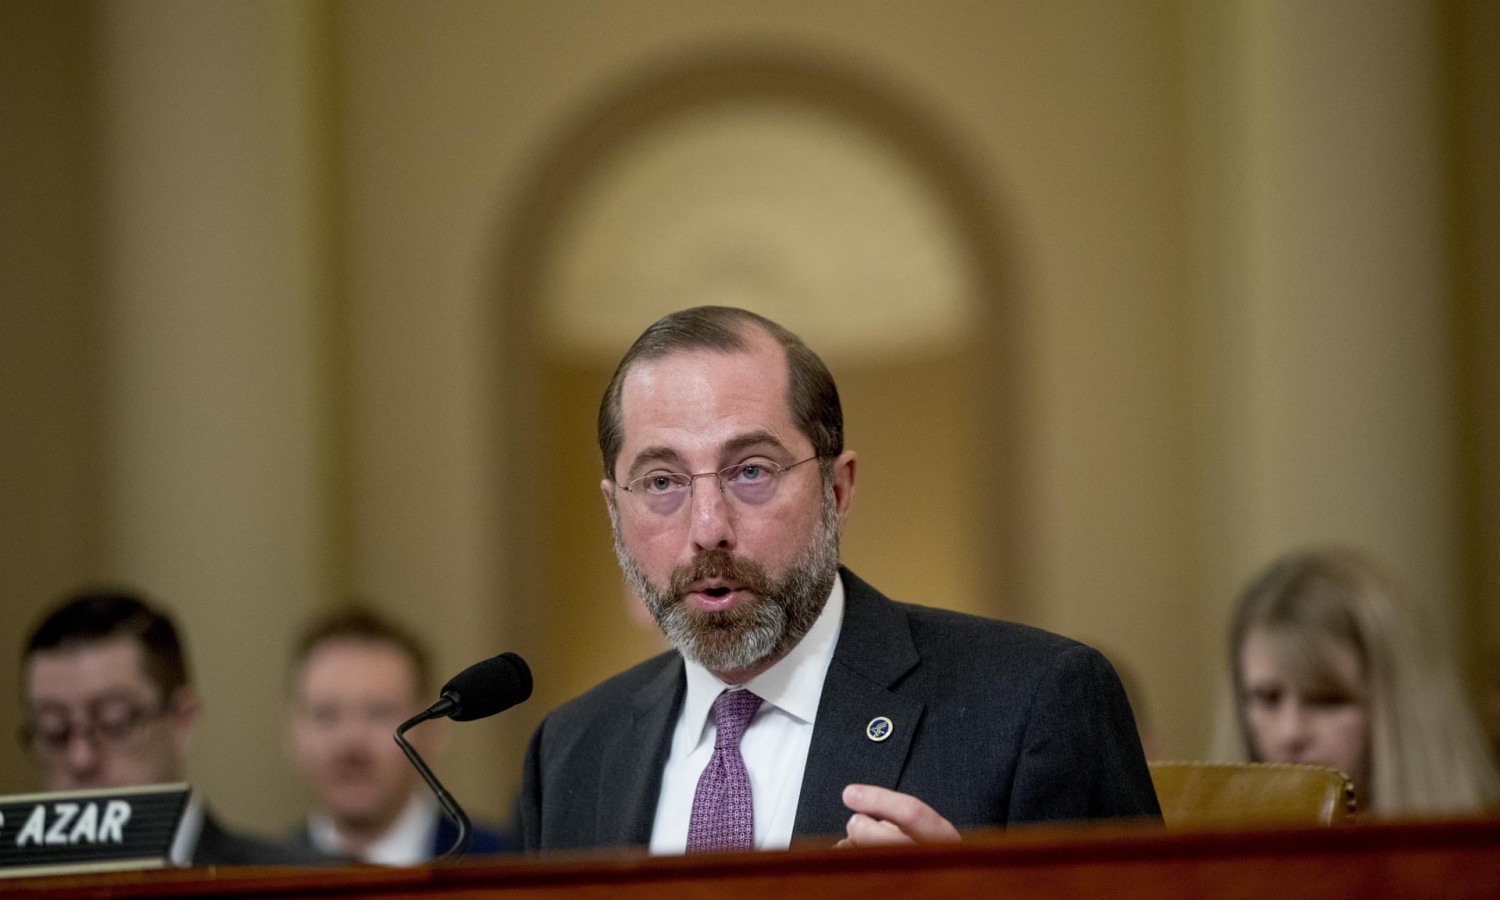 The health secretary, Alex Azar, said that his department’s staff ‘should never have been’ exposed to to evacuees from coronavirus-affected areas of China without protective clothing. Photograph: Andrew Harnik/AP